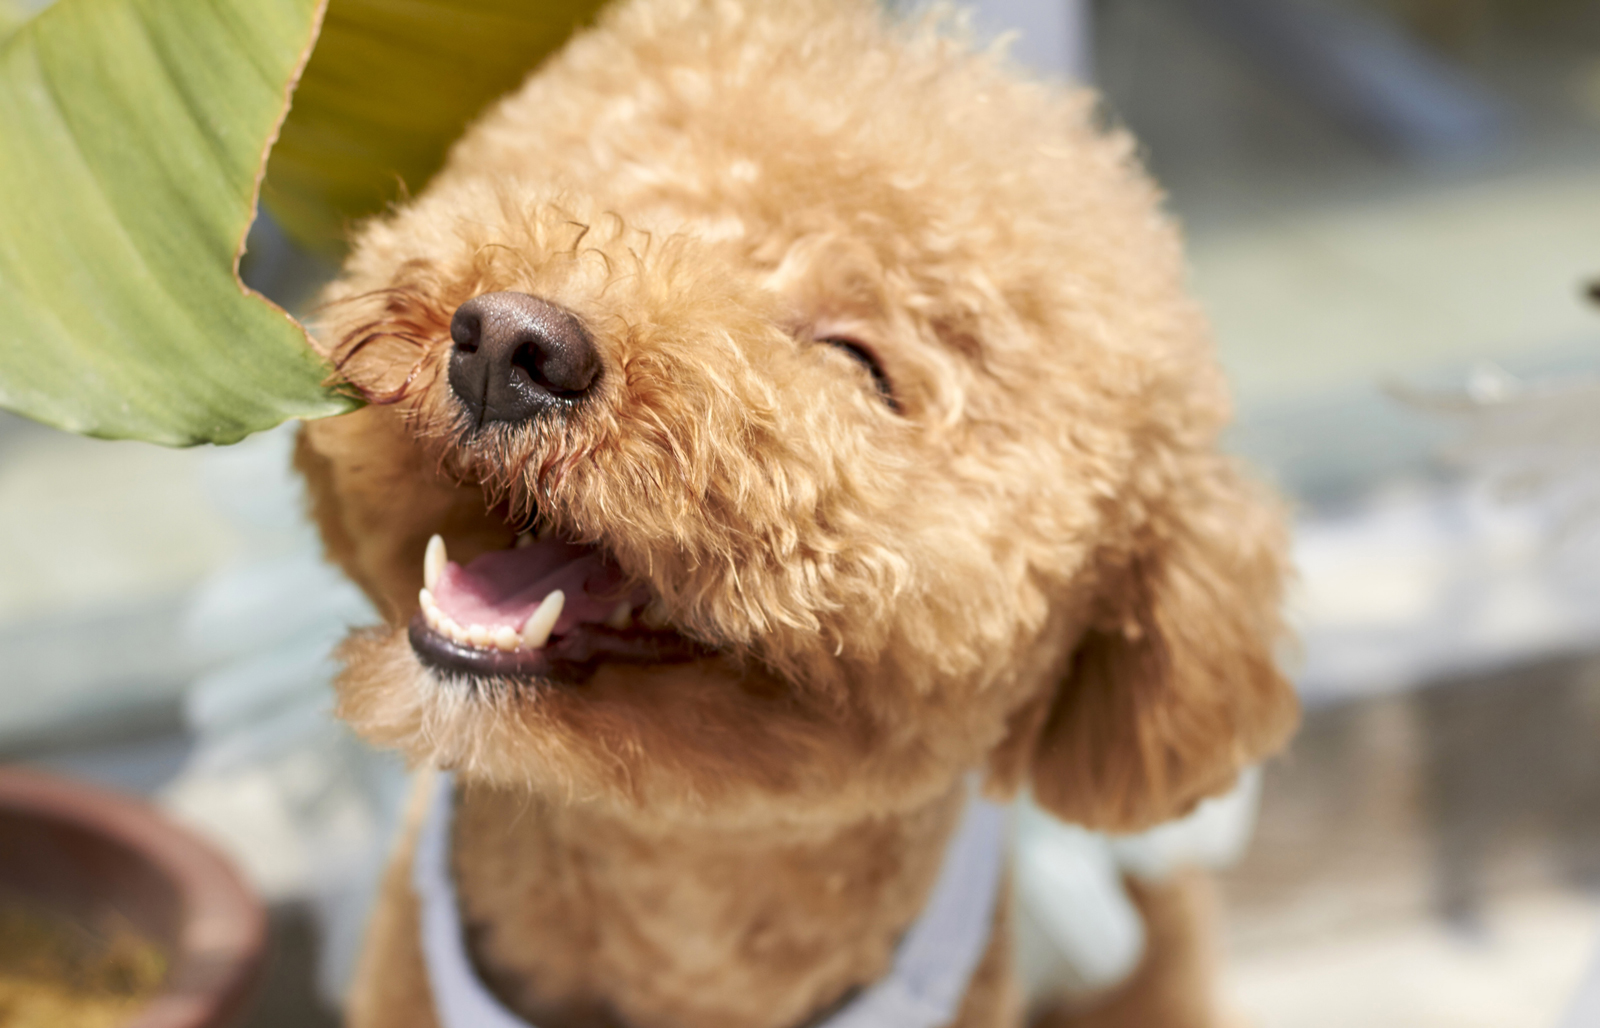 A poodle with its mouth open on a sunny day